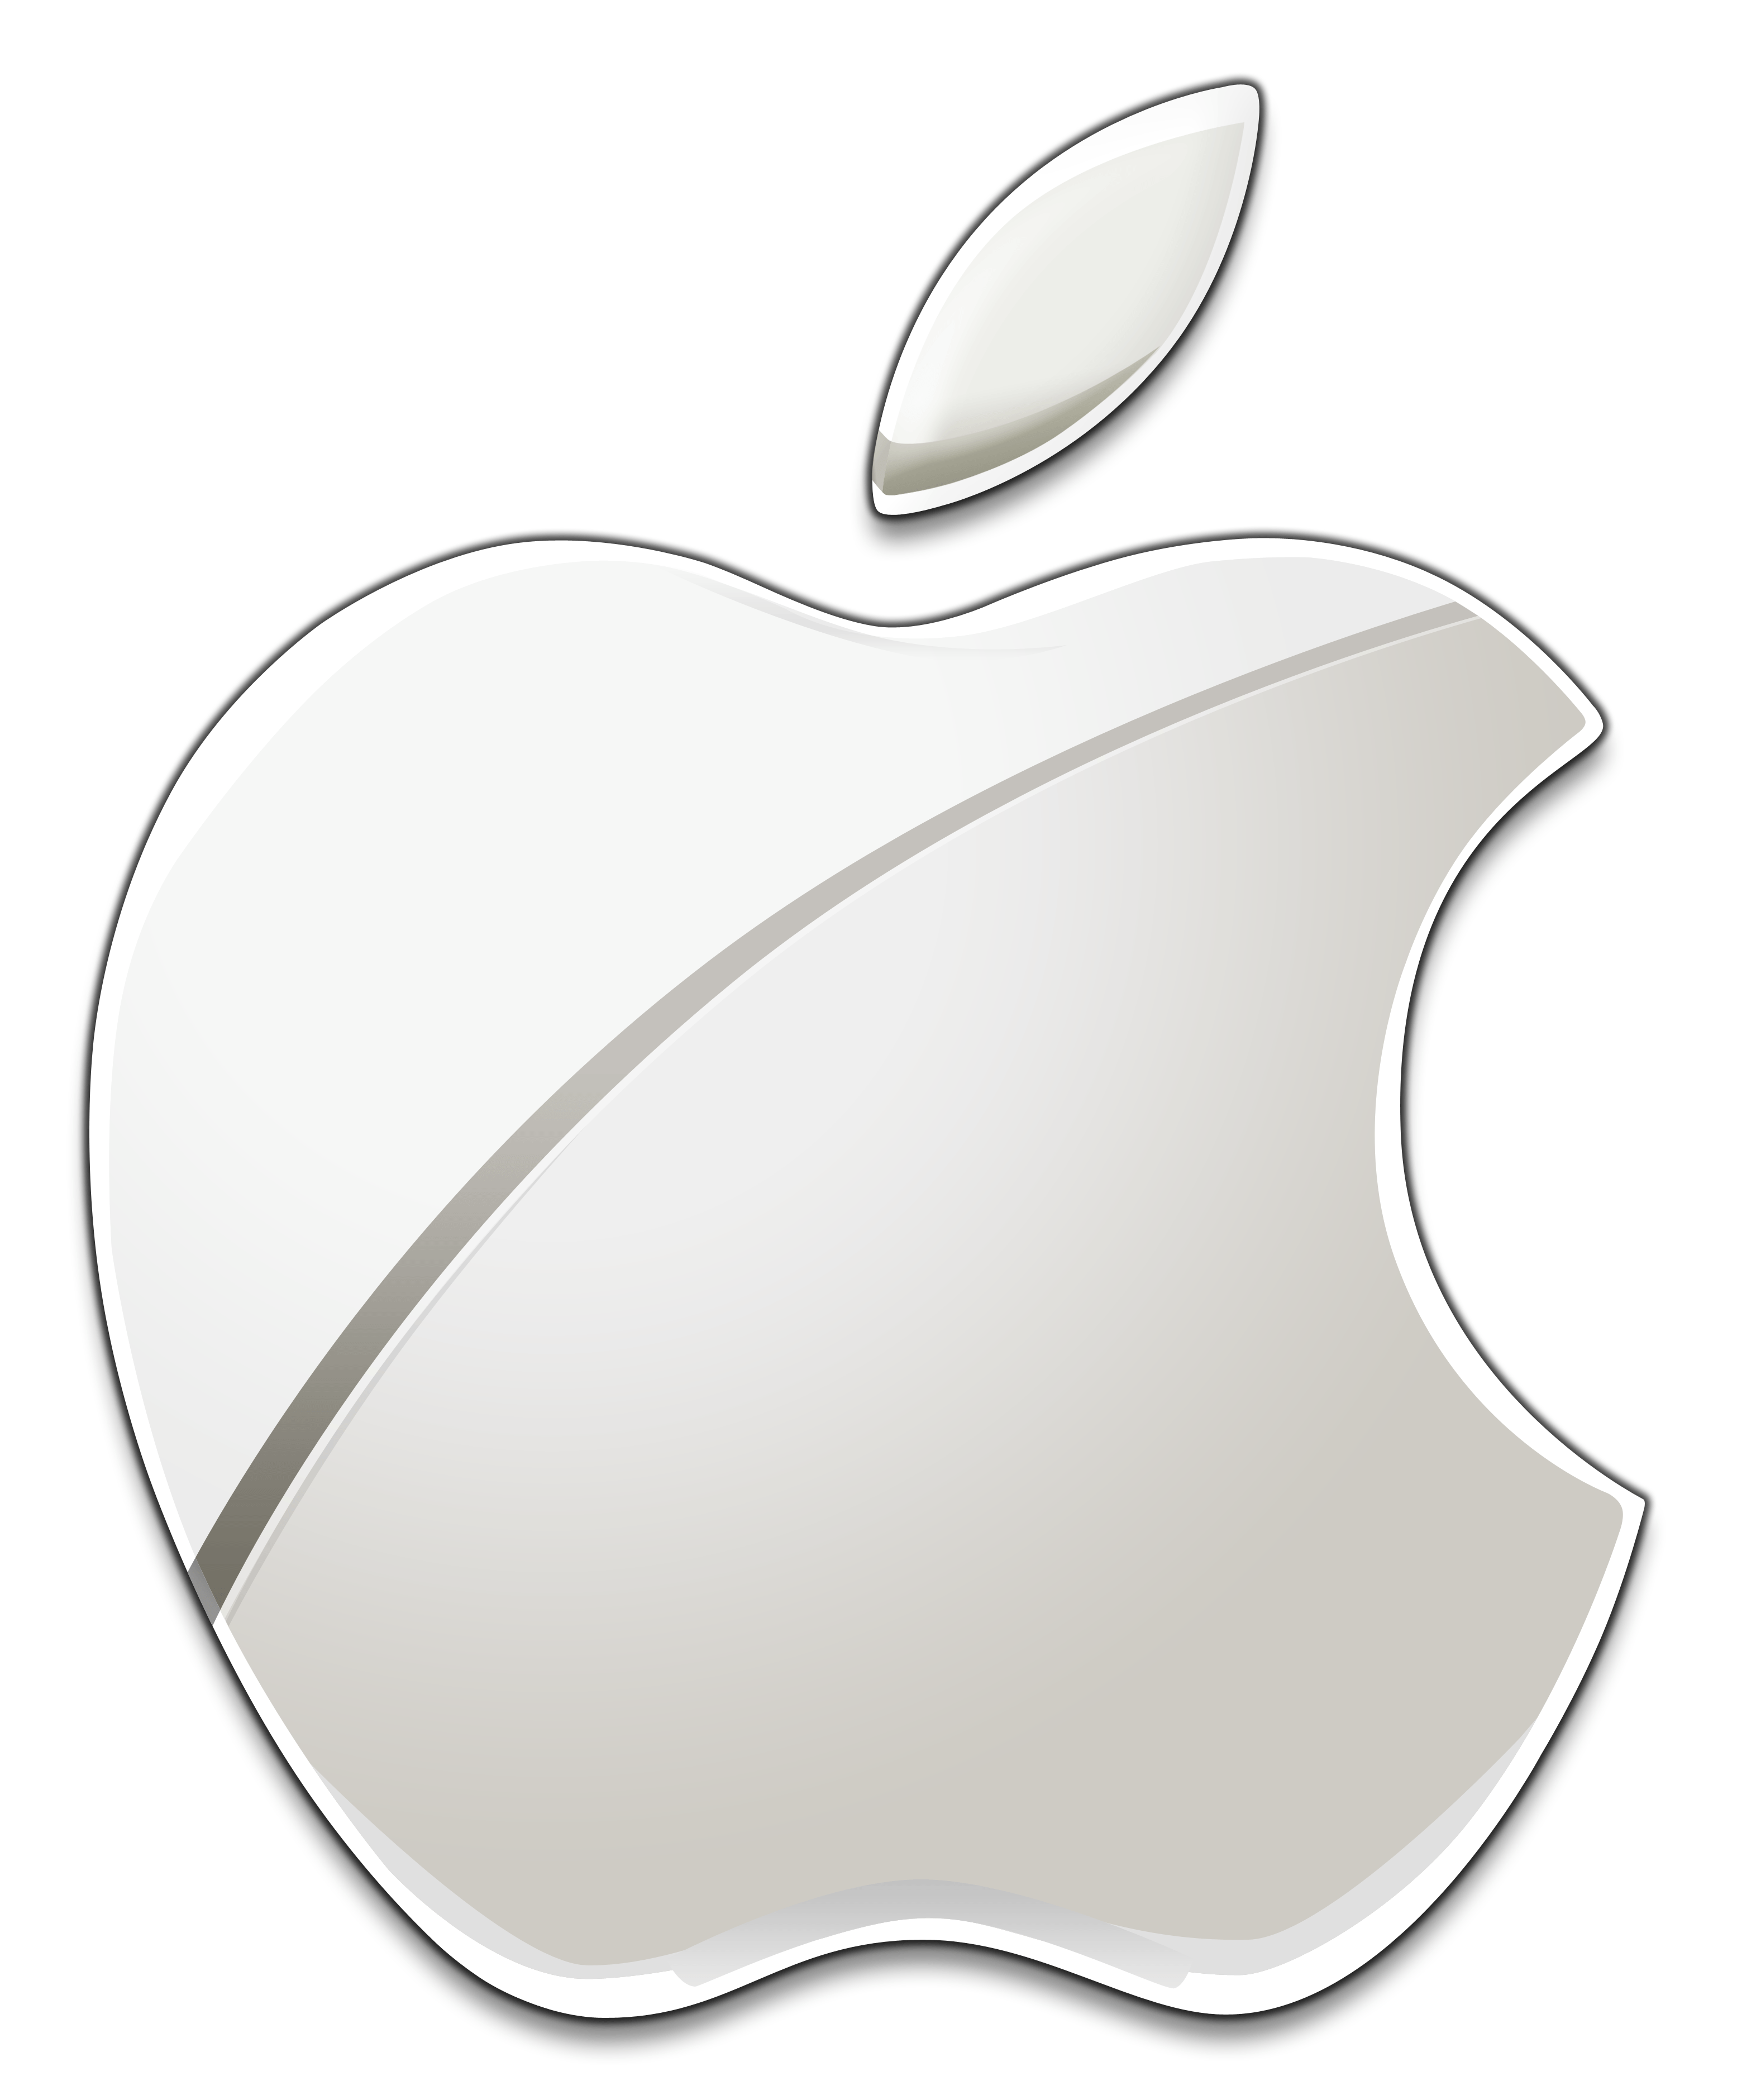 Future Apple Logo - Future IPhones To Sport On Screen Home Button And Fingerprint